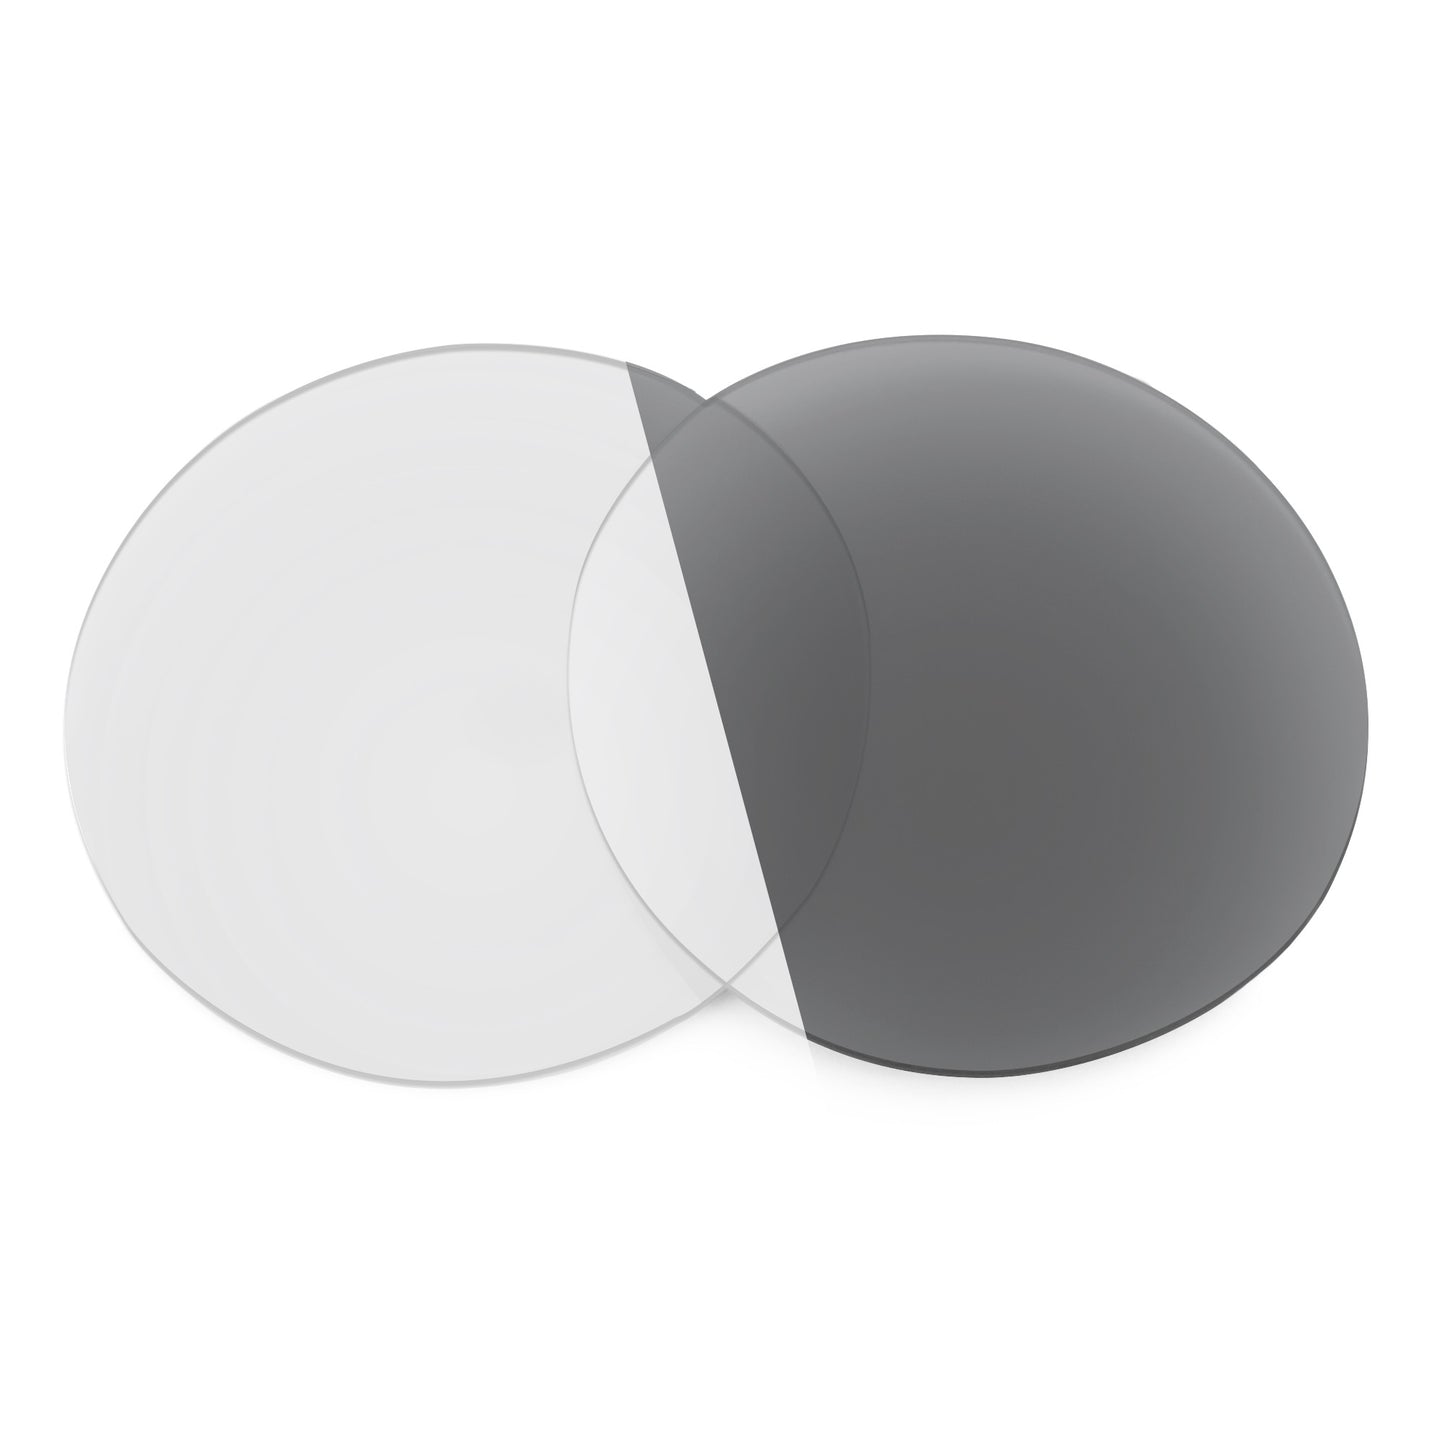 Revant replacement lenses for Ray-Ban RB4203 51mm Non-Polarized Adapt Gray Photochromic